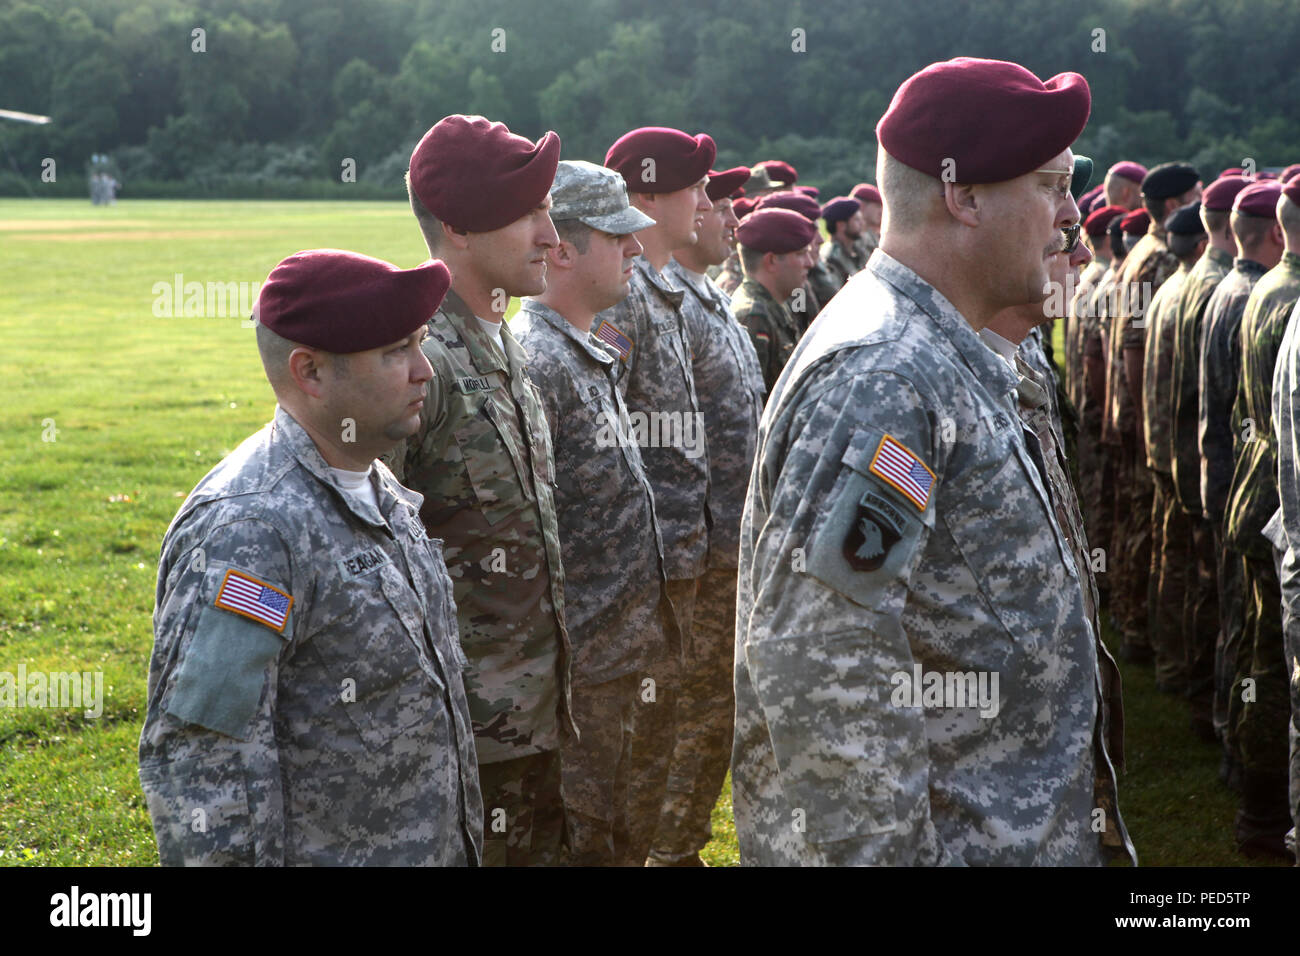 U.S. Army Staff Sgts. Edward Reagan and Justin Morelli of the 982nd Combat Camera Company (Airborne) stand in formation during the opening ceremonies of Leapfest 2015 in West Kingston, R.I., Aug. 1, 2015. Leapfest is an International parachute competition hosted by the 56th Troop Command, Rhode Island National Guard to promote high level technical training and esprit de corps within the International Airborne community. (U.S. Army Photo by Spc. Joseph Cathey/Released) Stock Photo